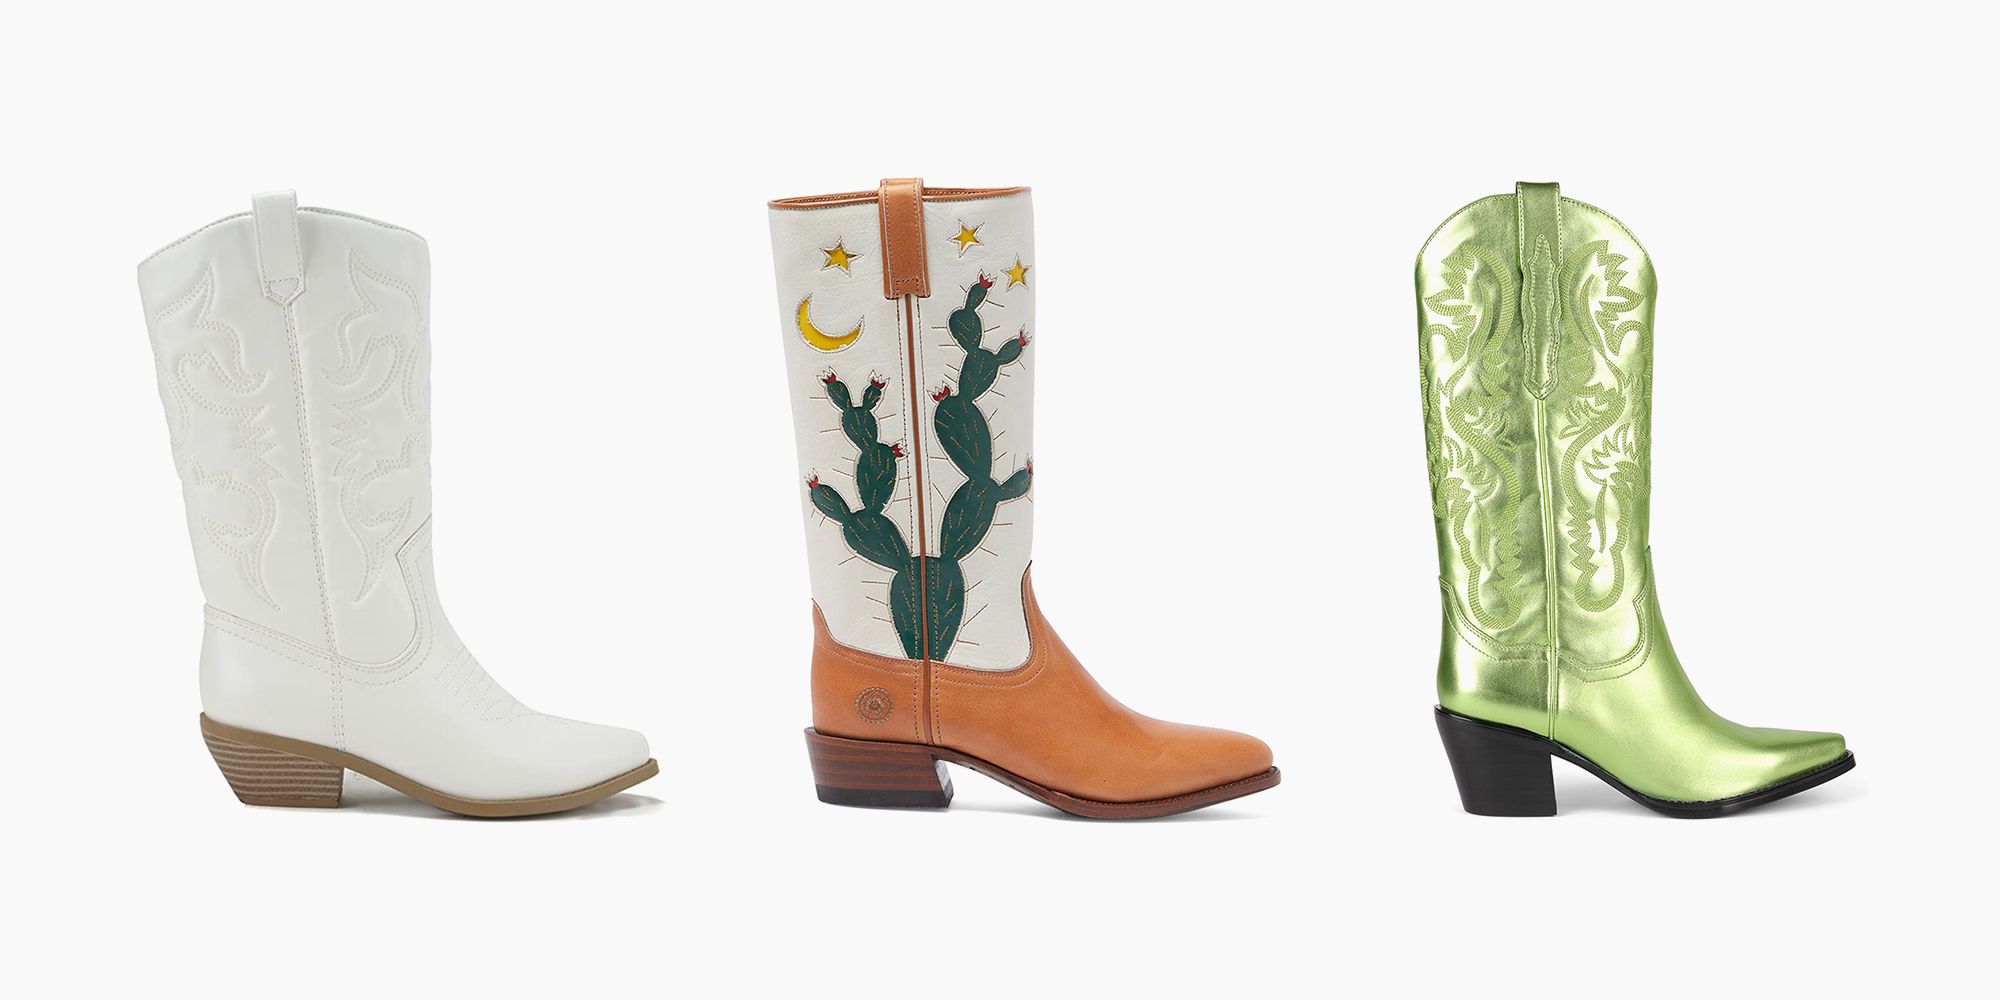 Best Cowboy Boots for Women – 17 Chic Cowboy Boots to Shop Now